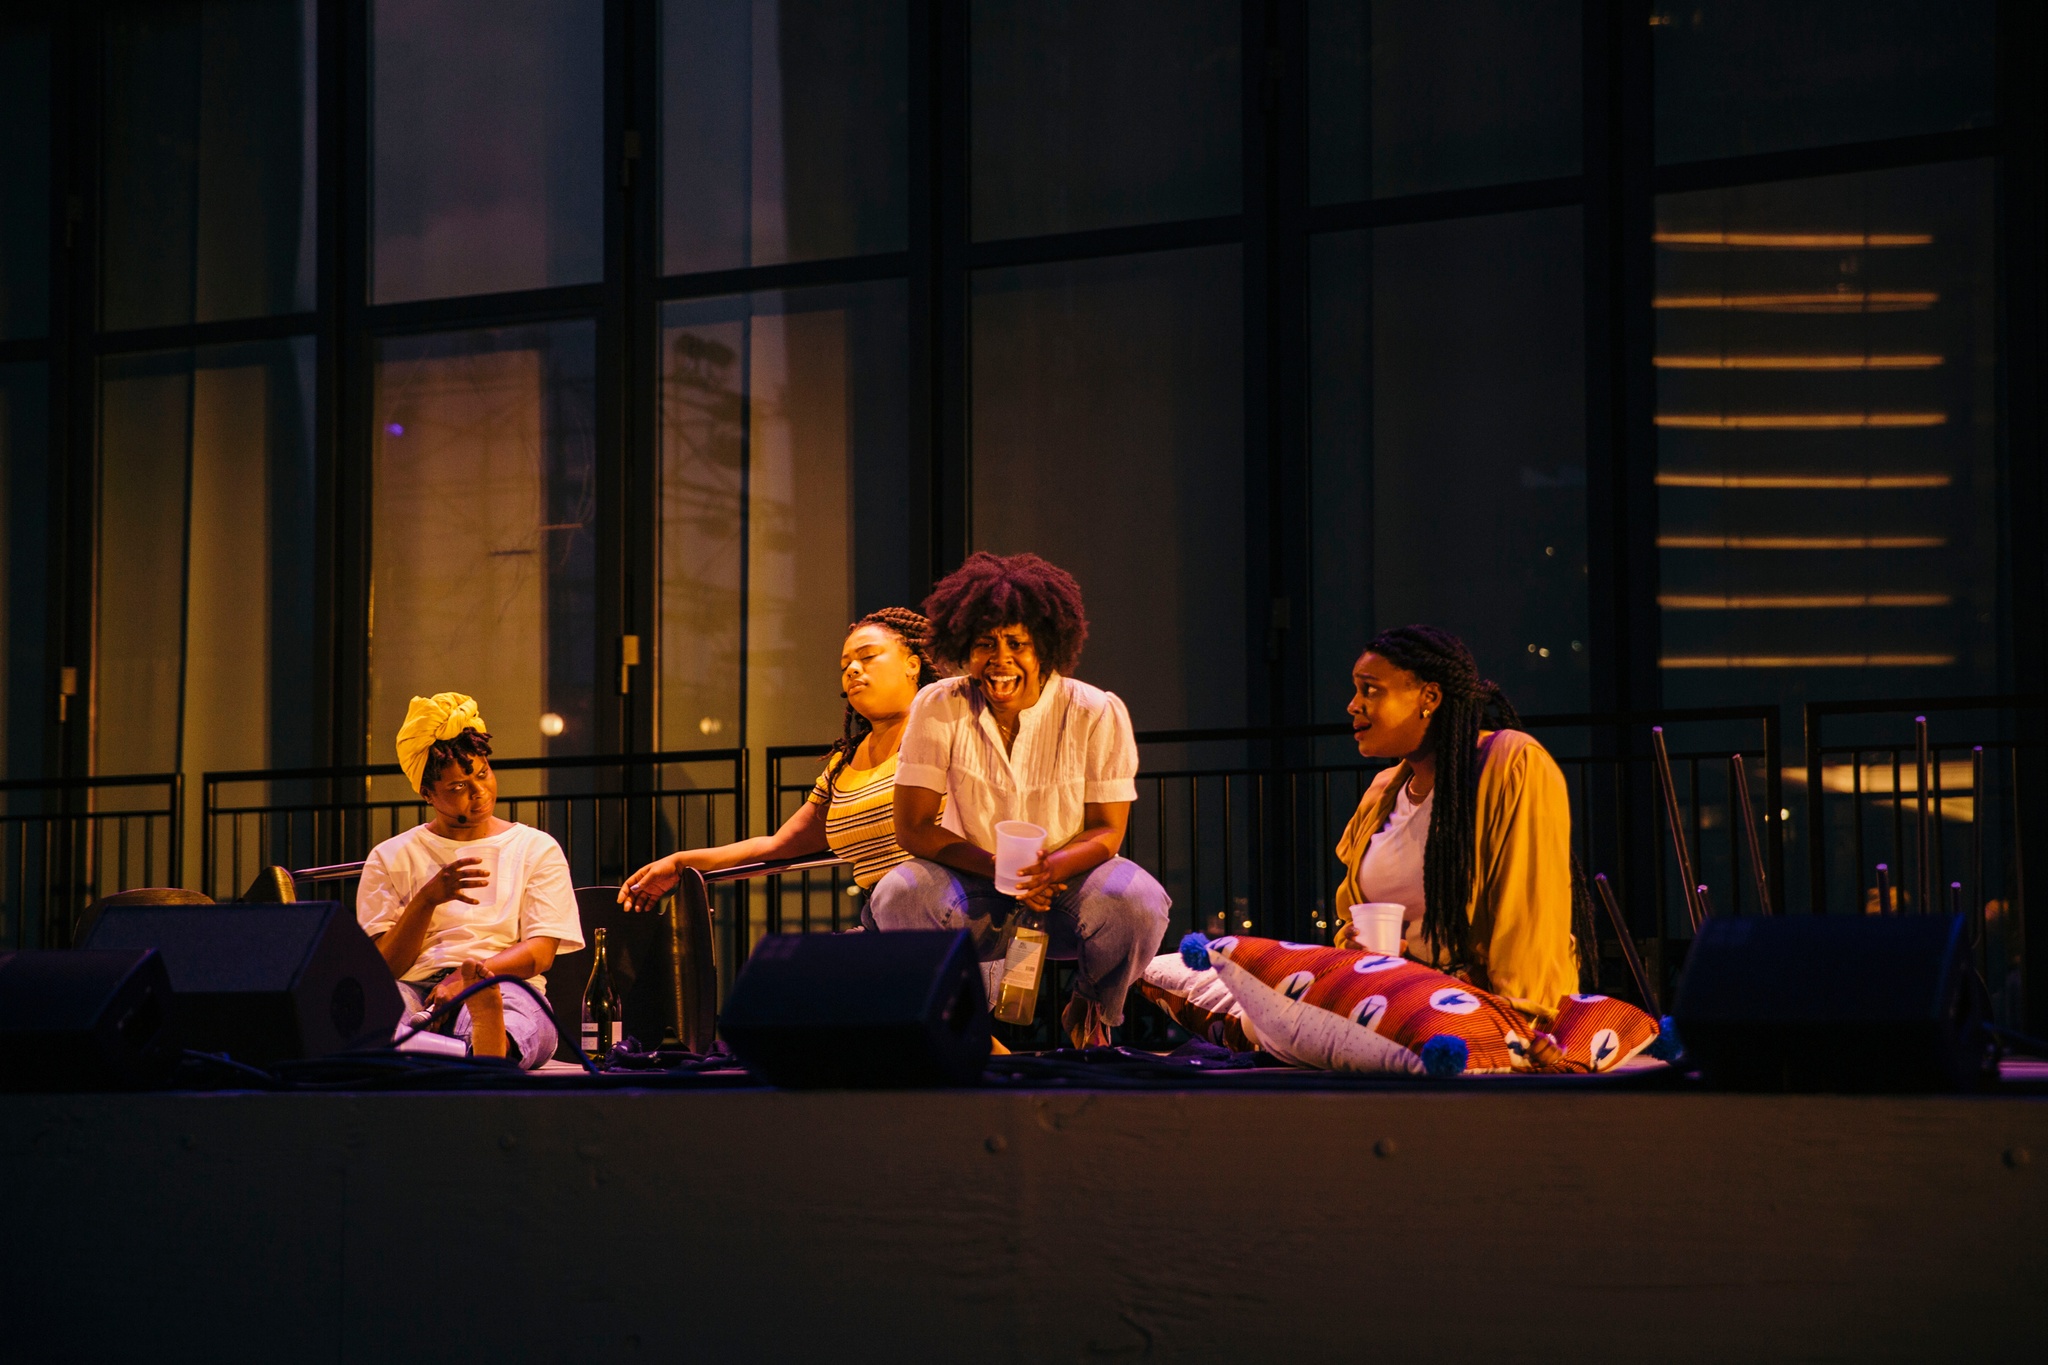 Four women sitting and acting on stage.